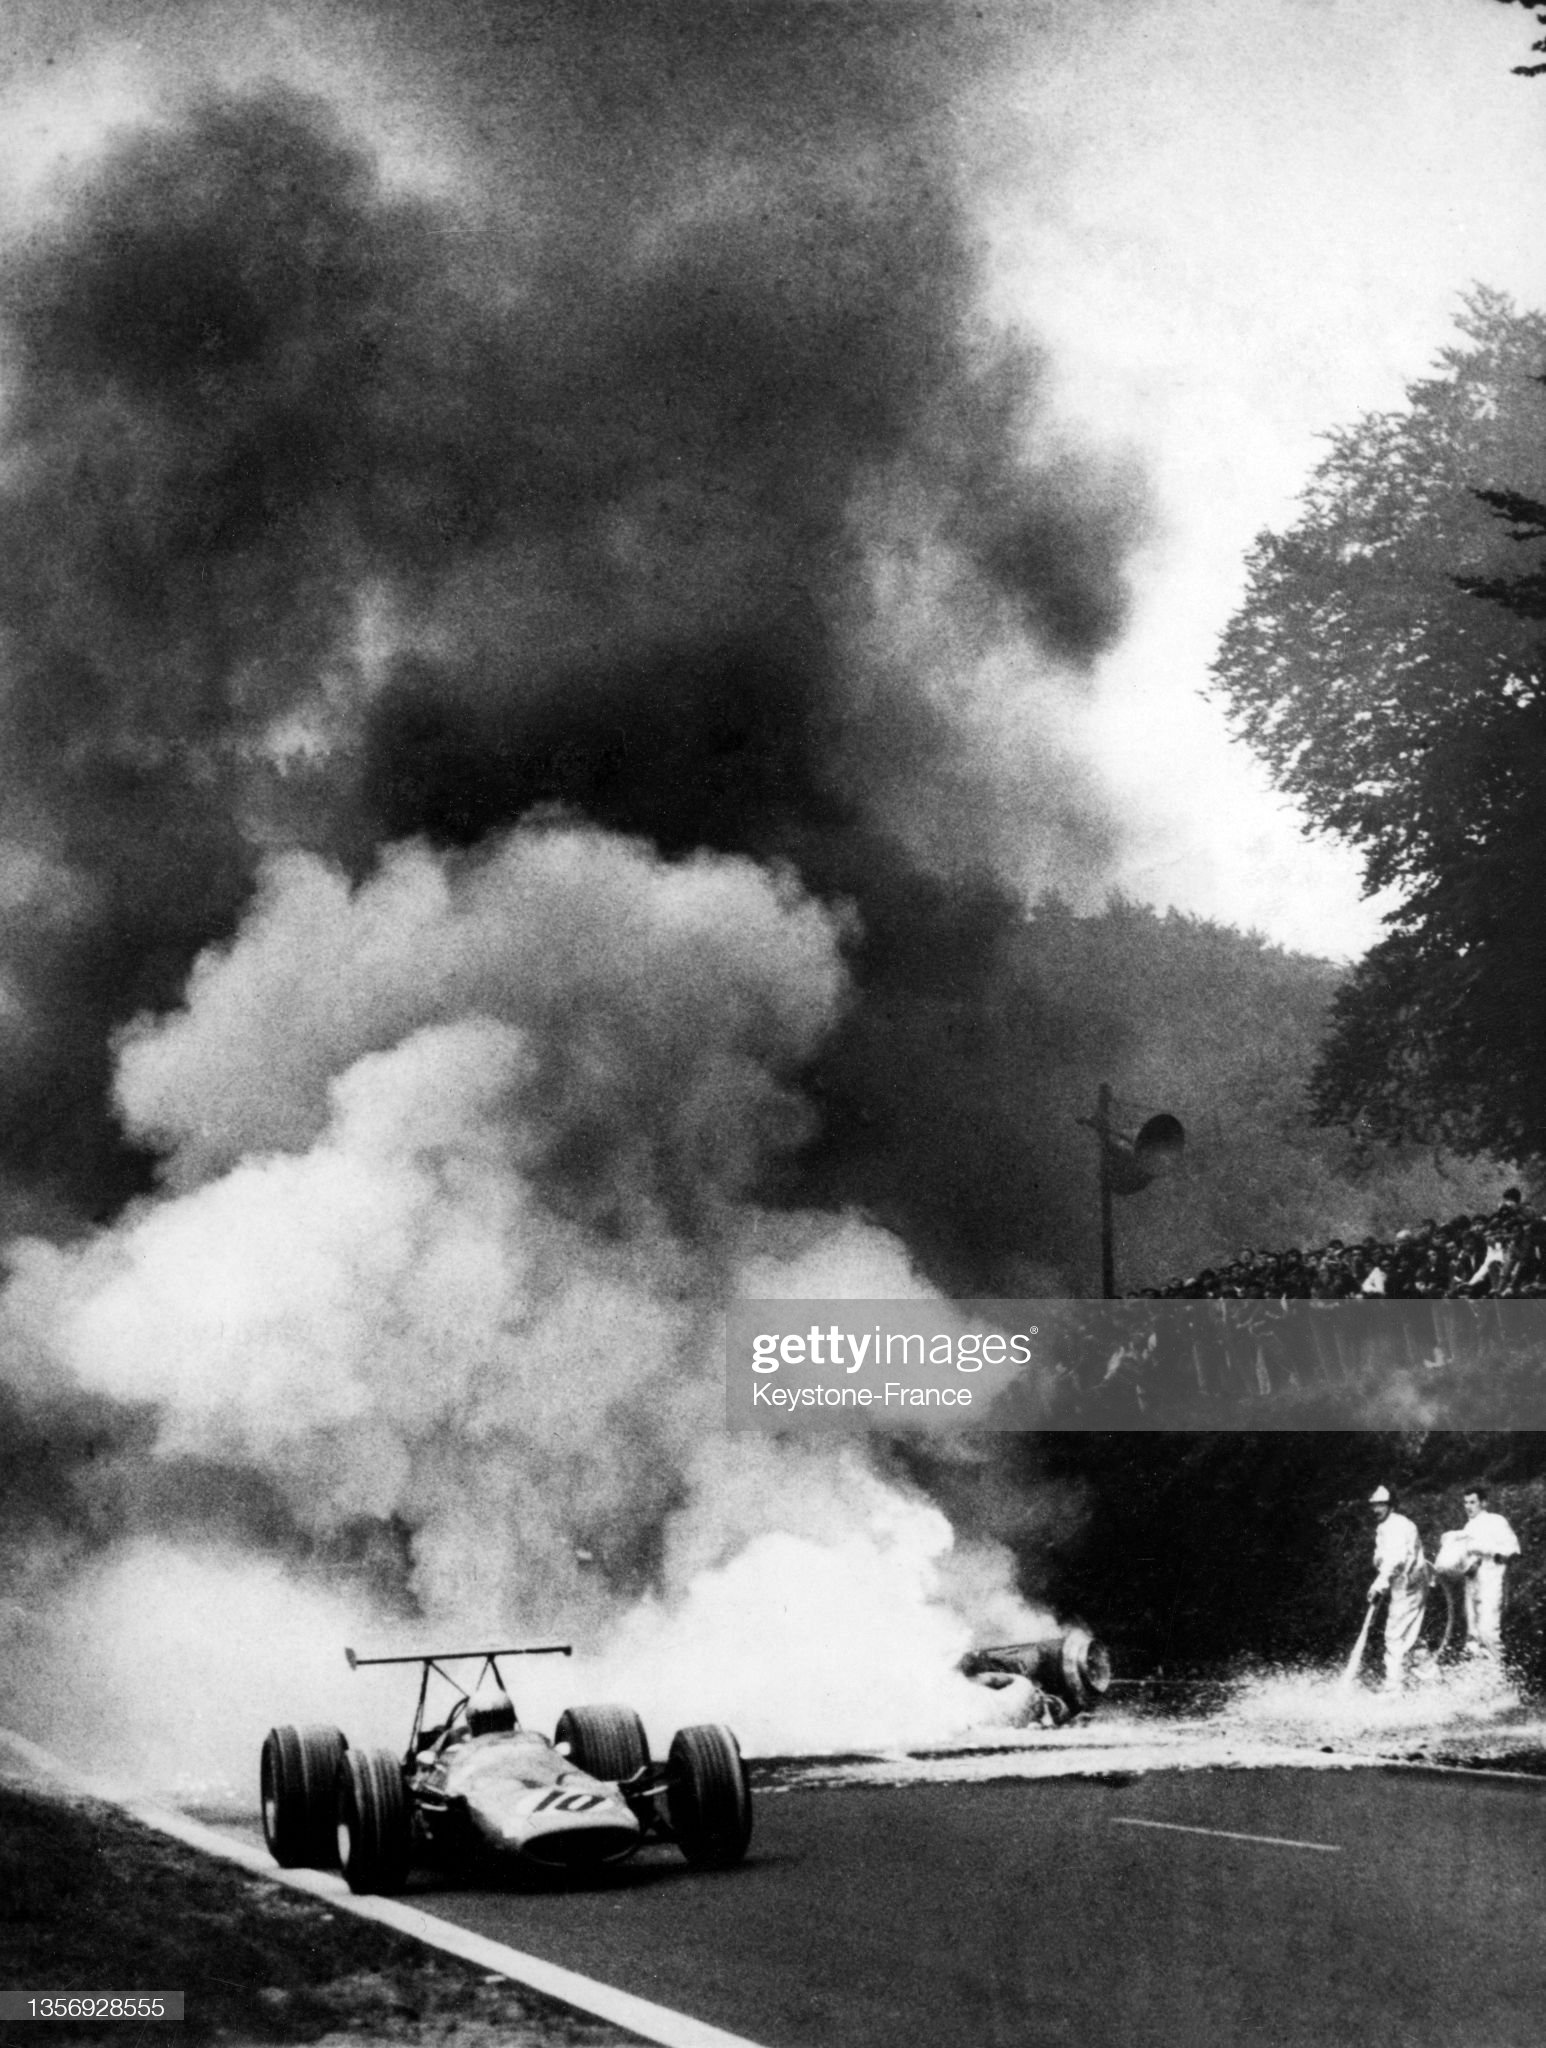 Jo Schlesser's car in flames during his fatal accident.